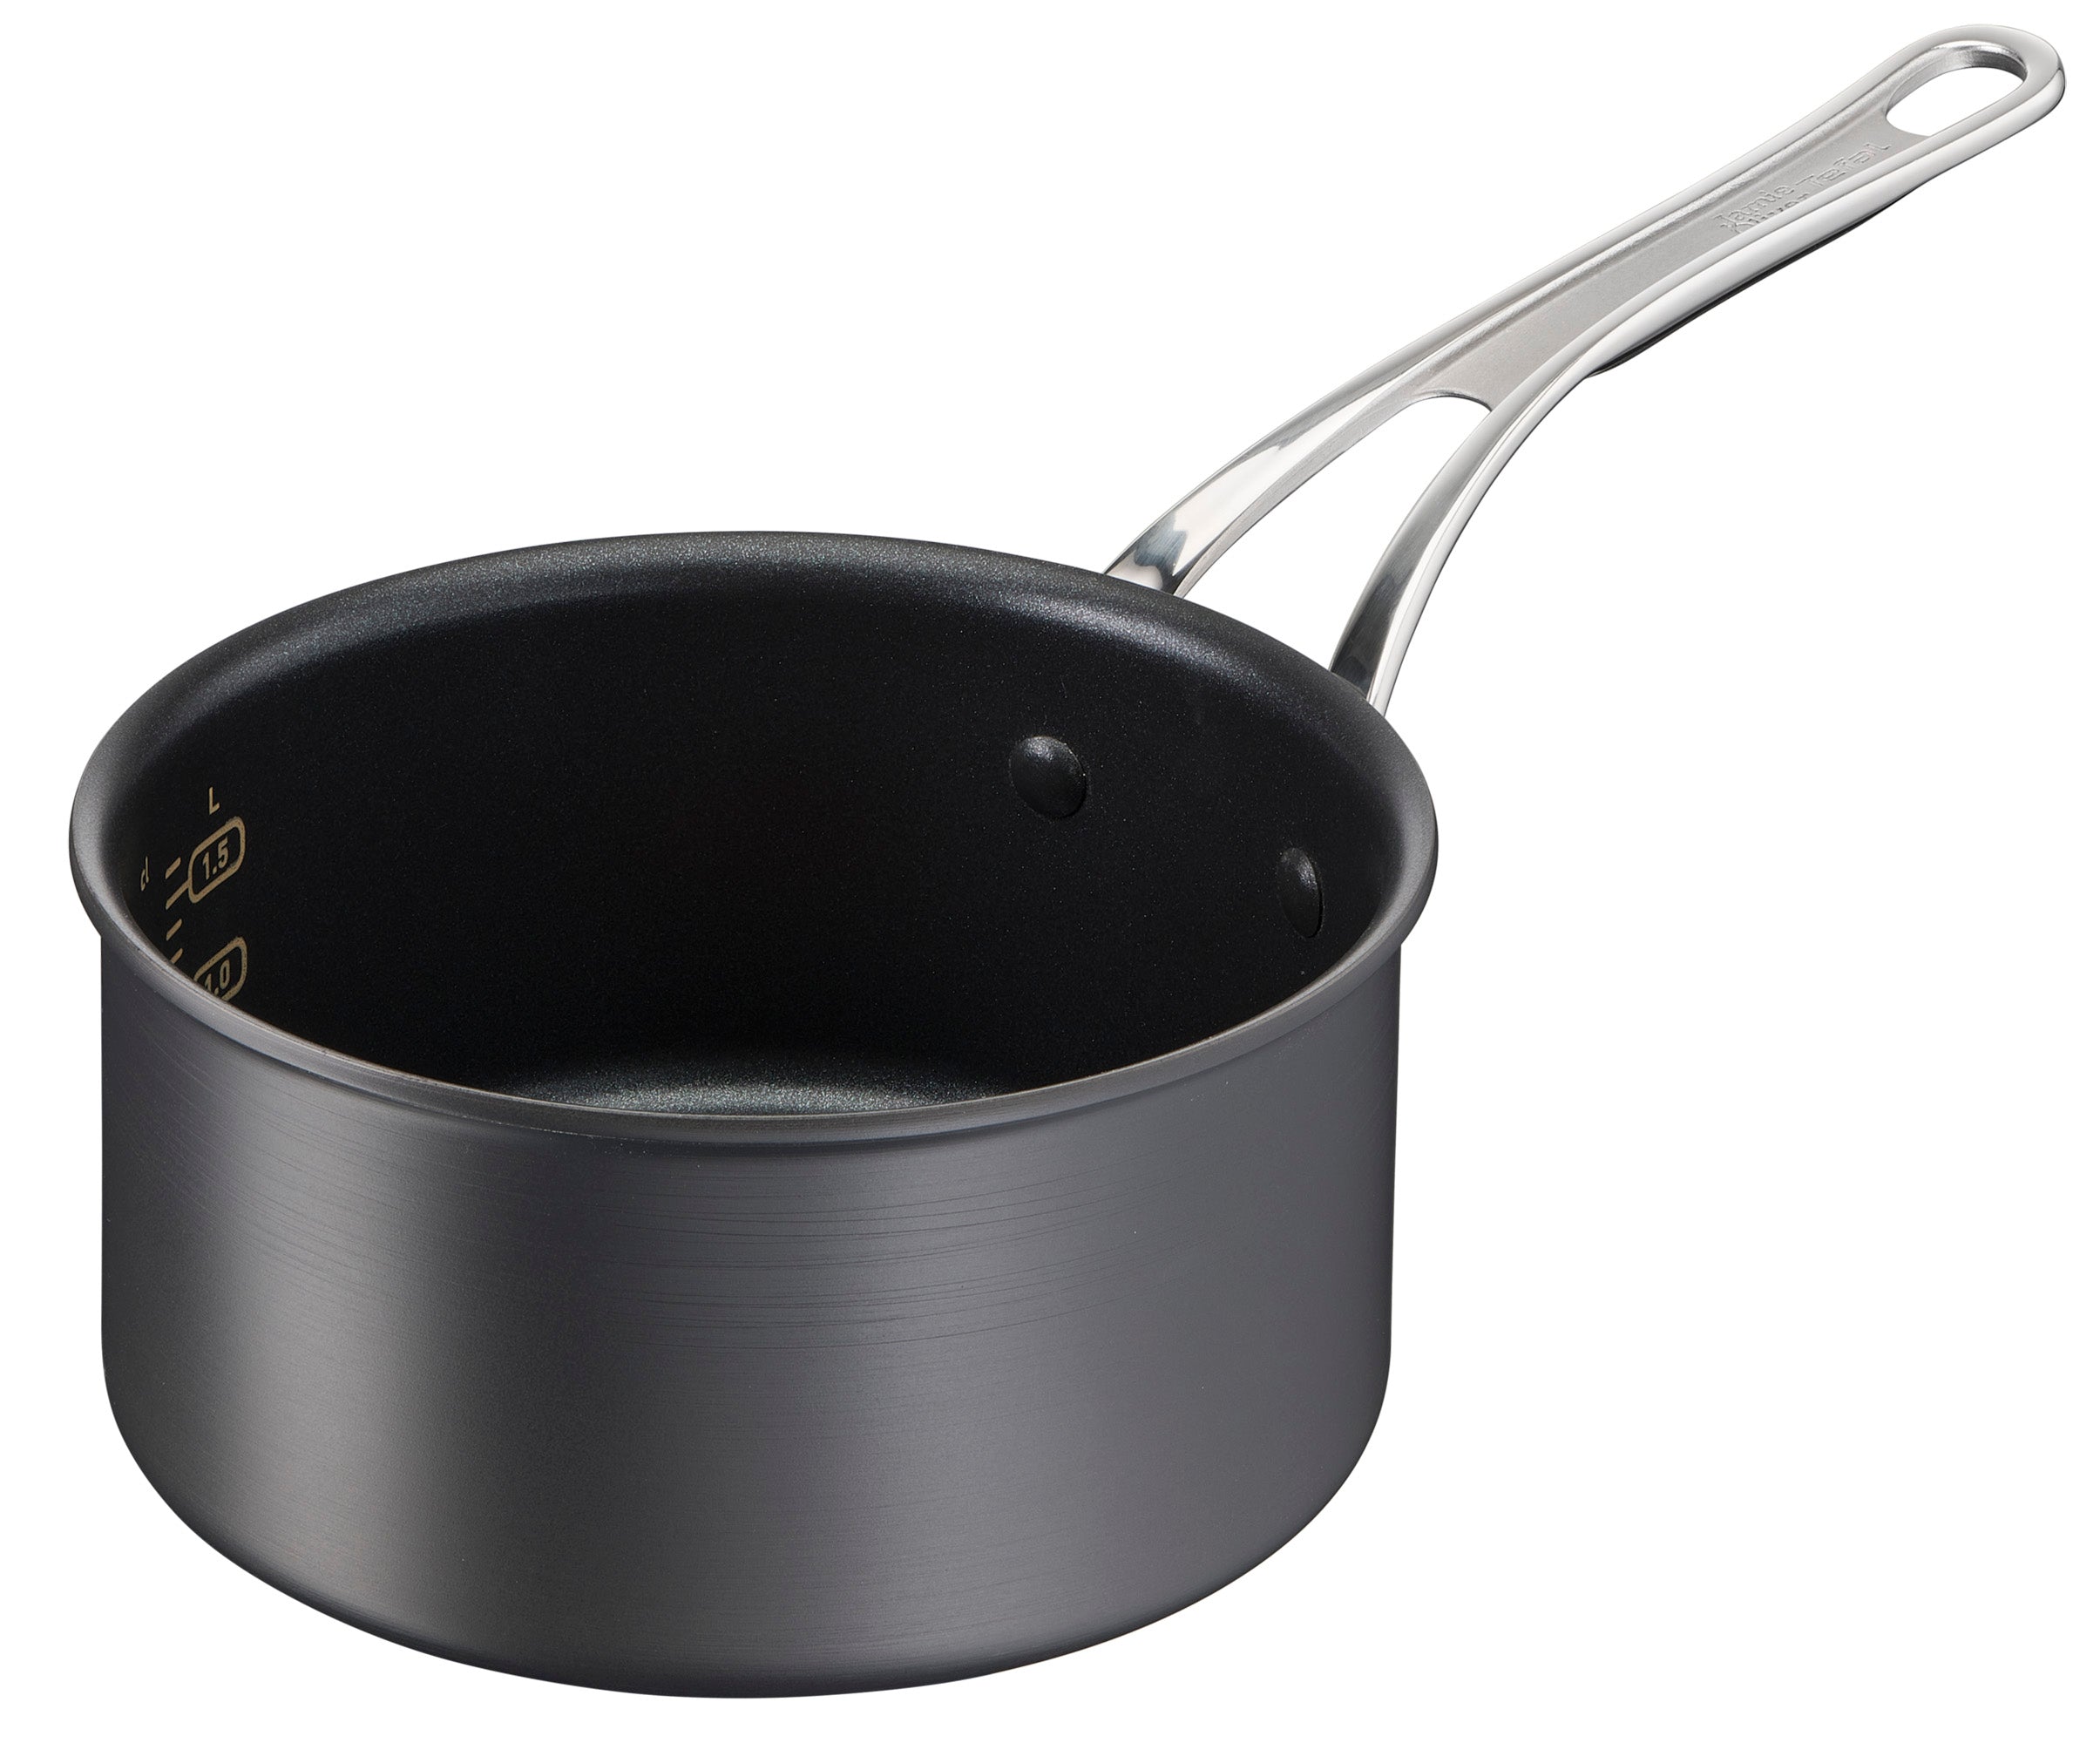 Jamie Oliver by Tefal Cooks Classic Non-Stick Induction Hard Anodised Saucepan + Lid 18cm